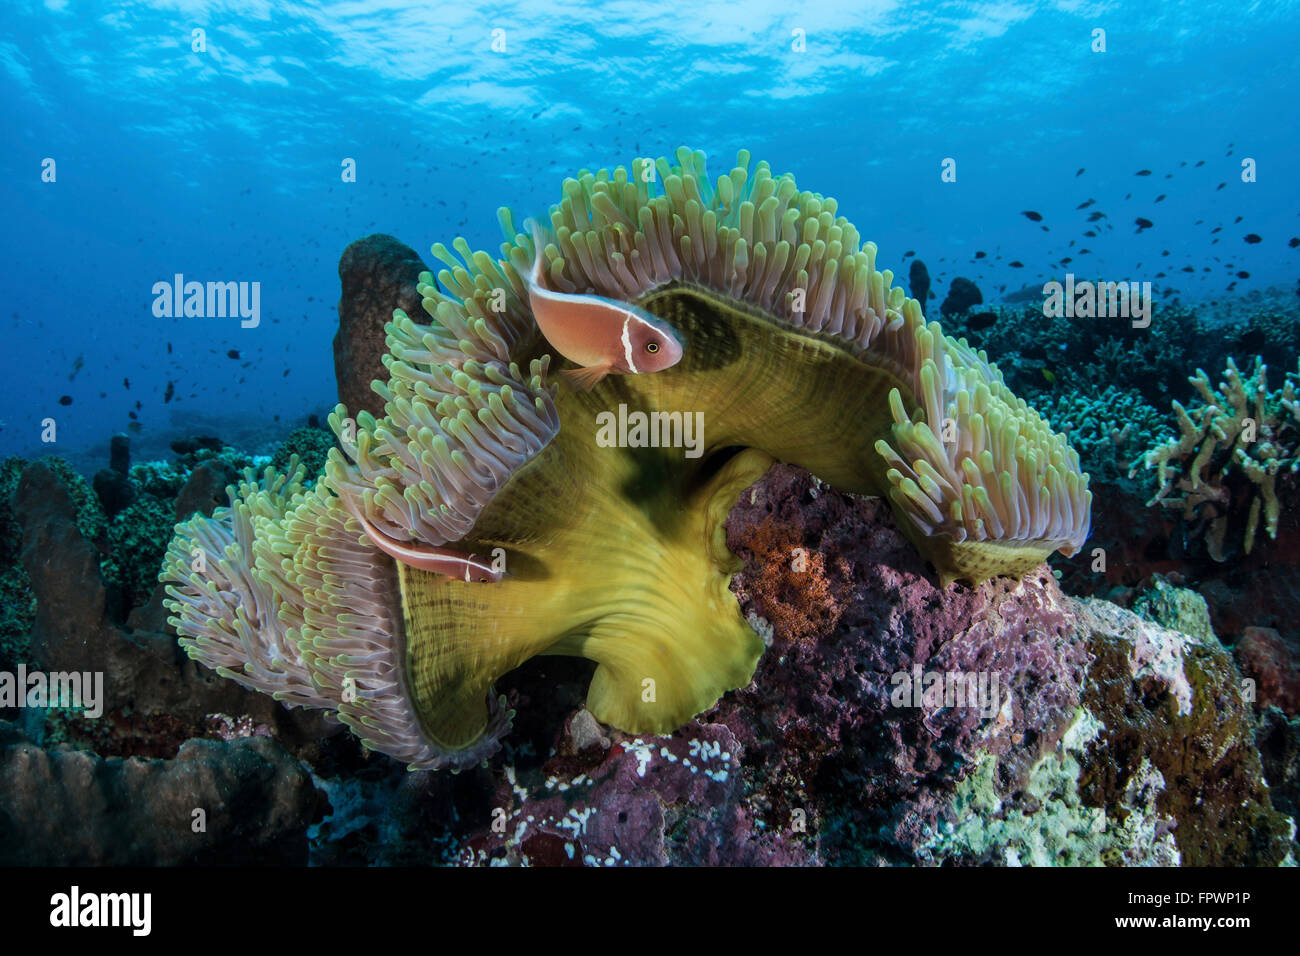 A pink anemonefish swims near its host anemone near the island of Sulawesi, Indonesia. This beautiful, tropical region is home t Stock Photo